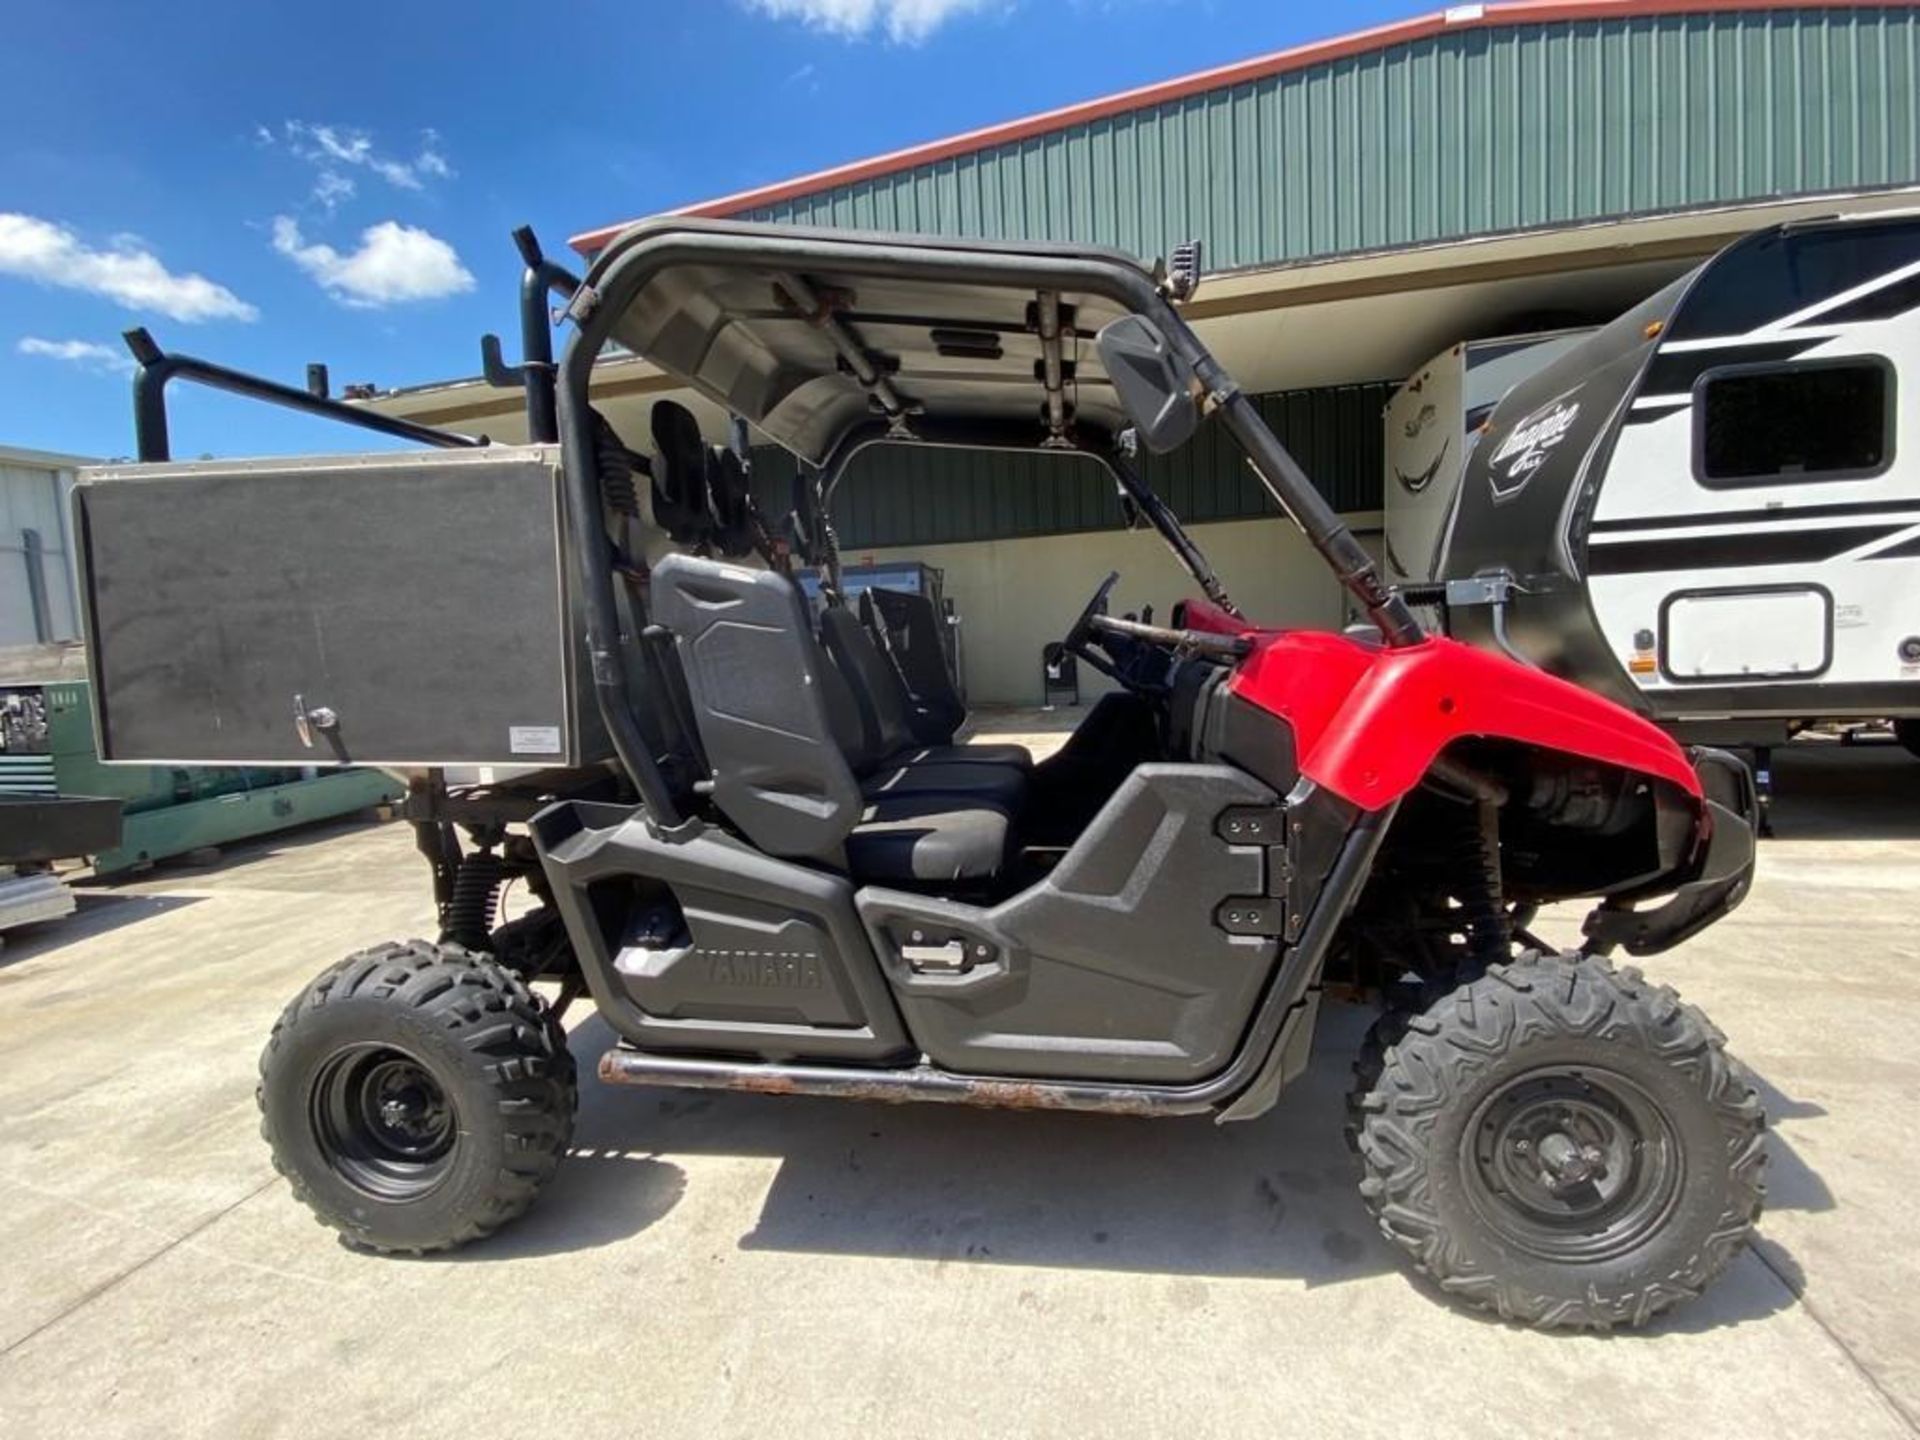 YAMAHA UTV WITH TOOL/STORAGE BIN, HAS RUST ON UNDER CARRIAGE AND FRAME, RUNS AND OPERATES - Image 8 of 20